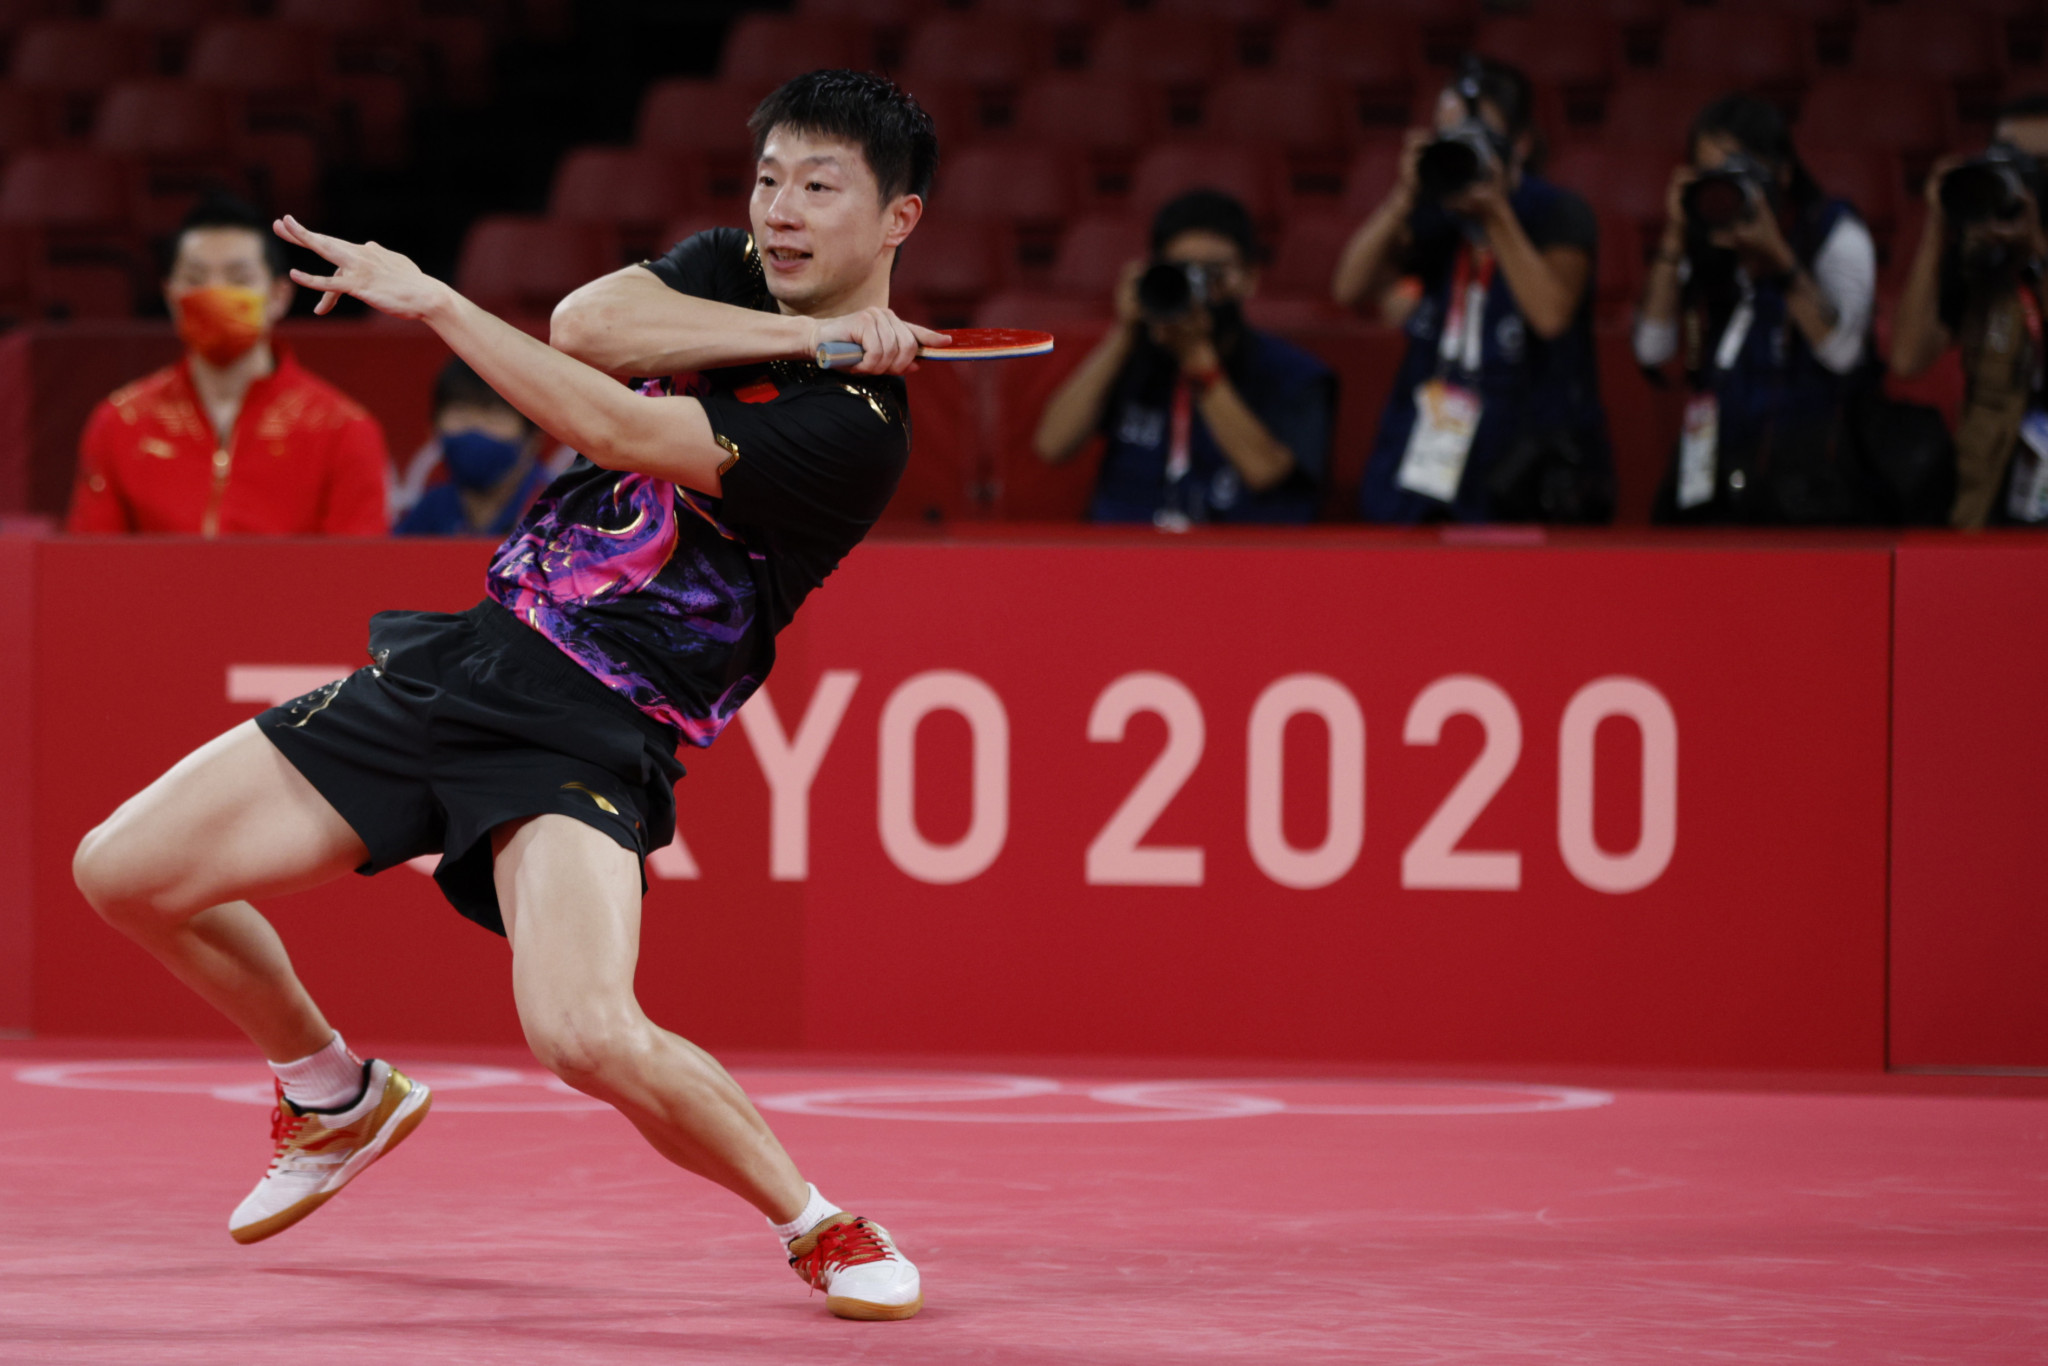 Asian players, like China's Ma Long, winner of the men's singles, dominated the Olympic tournament at Tokyo 2020 ©Getty Images